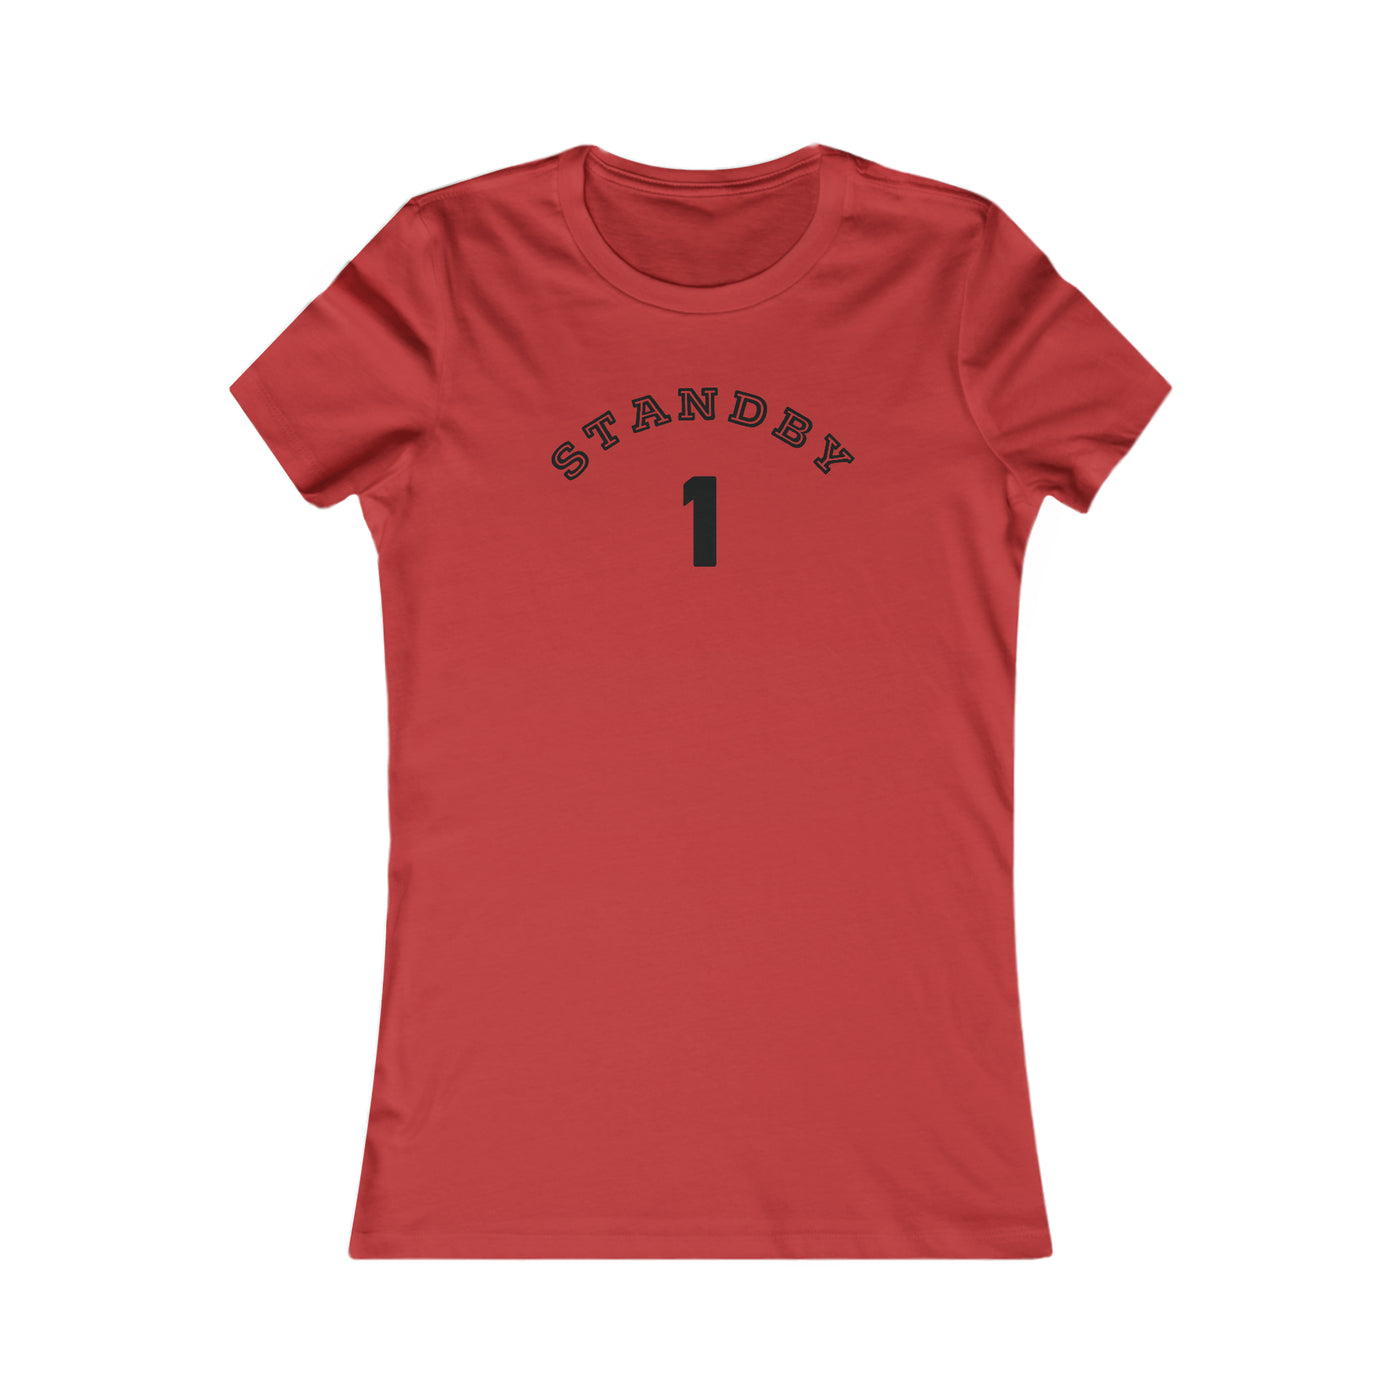 Standby One Women's Favorite Tee